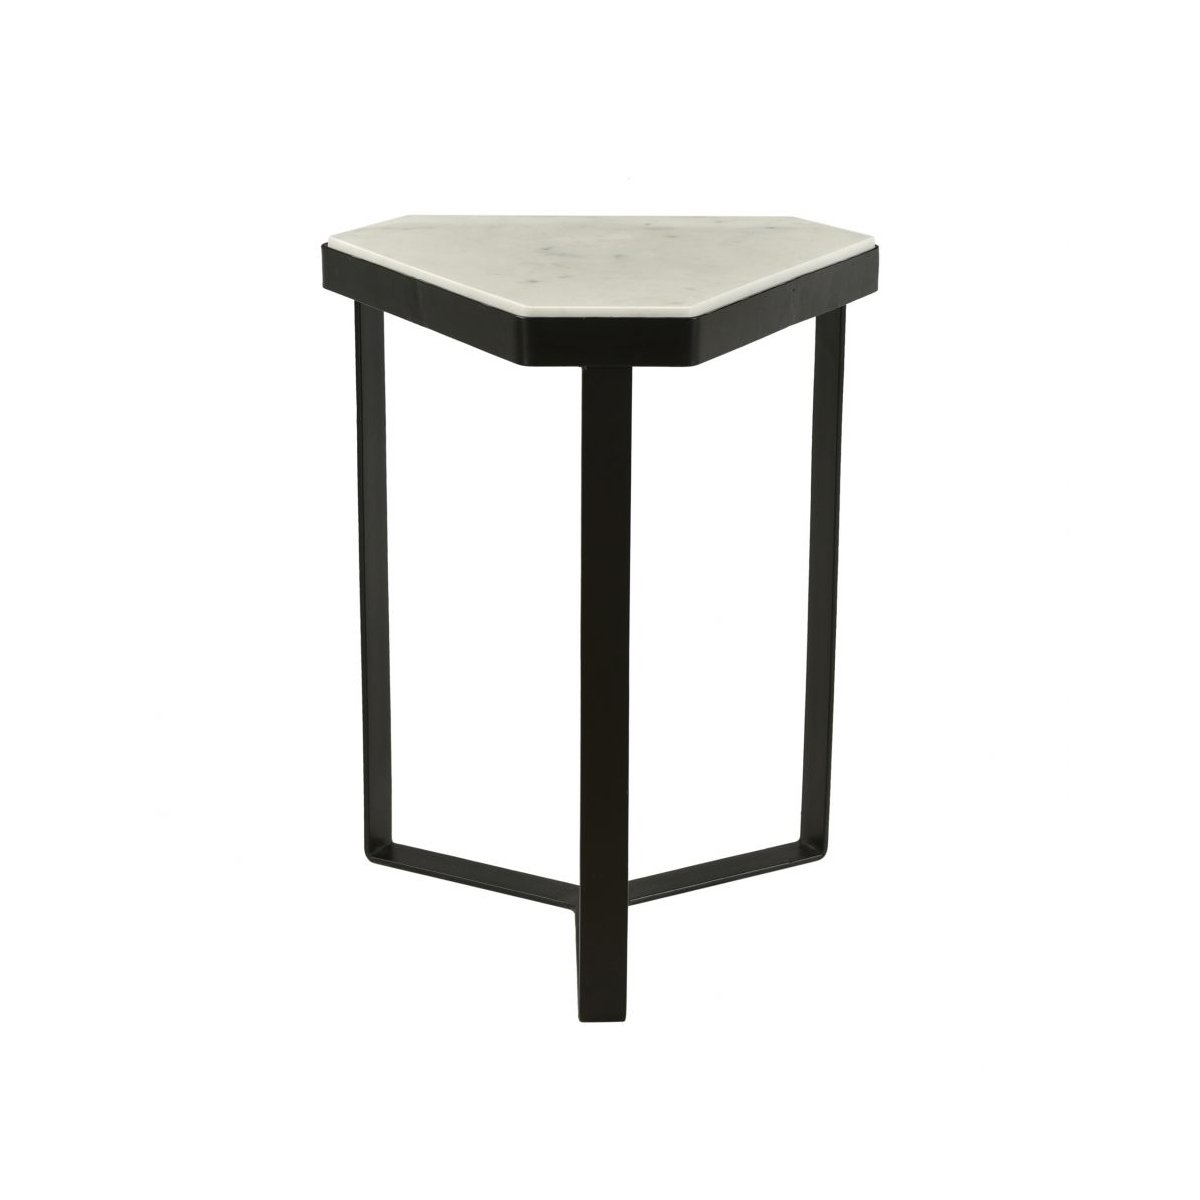 Load image into Gallery viewer, Inform Accent Table Accent Tables Moe&amp;#39;s     Four Hands, Burke Decor, Mid Century Modern Furniture, Old Bones Furniture Company, Old Bones Co, Modern Mid Century, Designer Furniture, https://www.oldbonesco.com/
